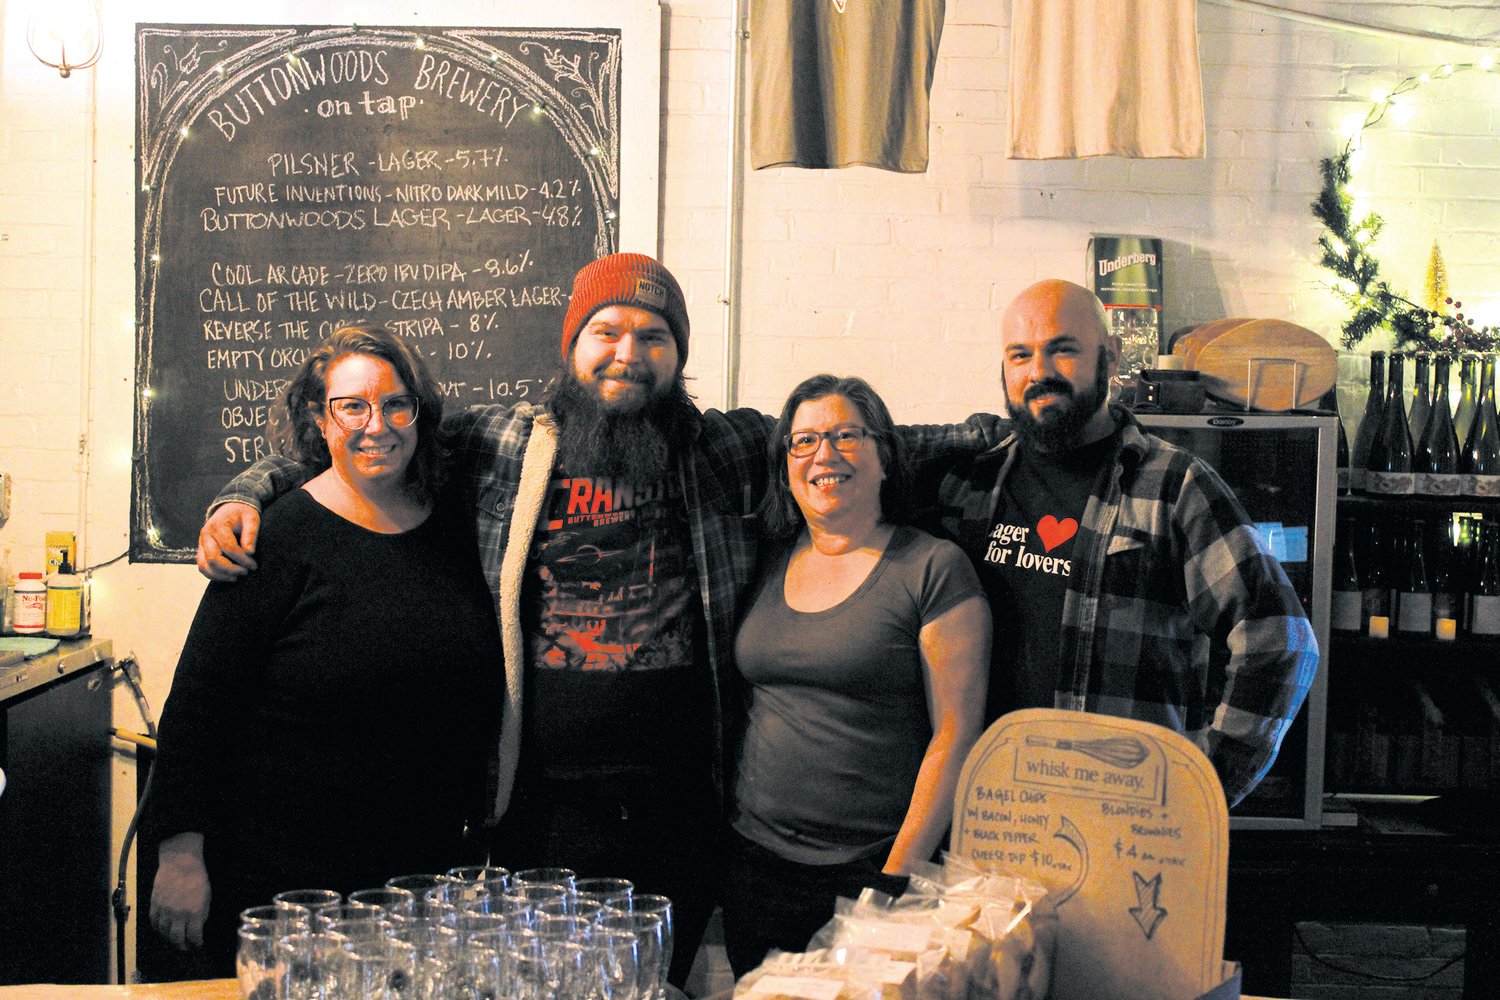 POSING WITH PRIDE: Tasting Room Manager Jennie Paquin, Brewer Morgan Snyder Jr, Cheese Shop Owner Adrienne D’Arconte and Bartender Sean Fitts Celebrate another successful beer and cheese tasting.